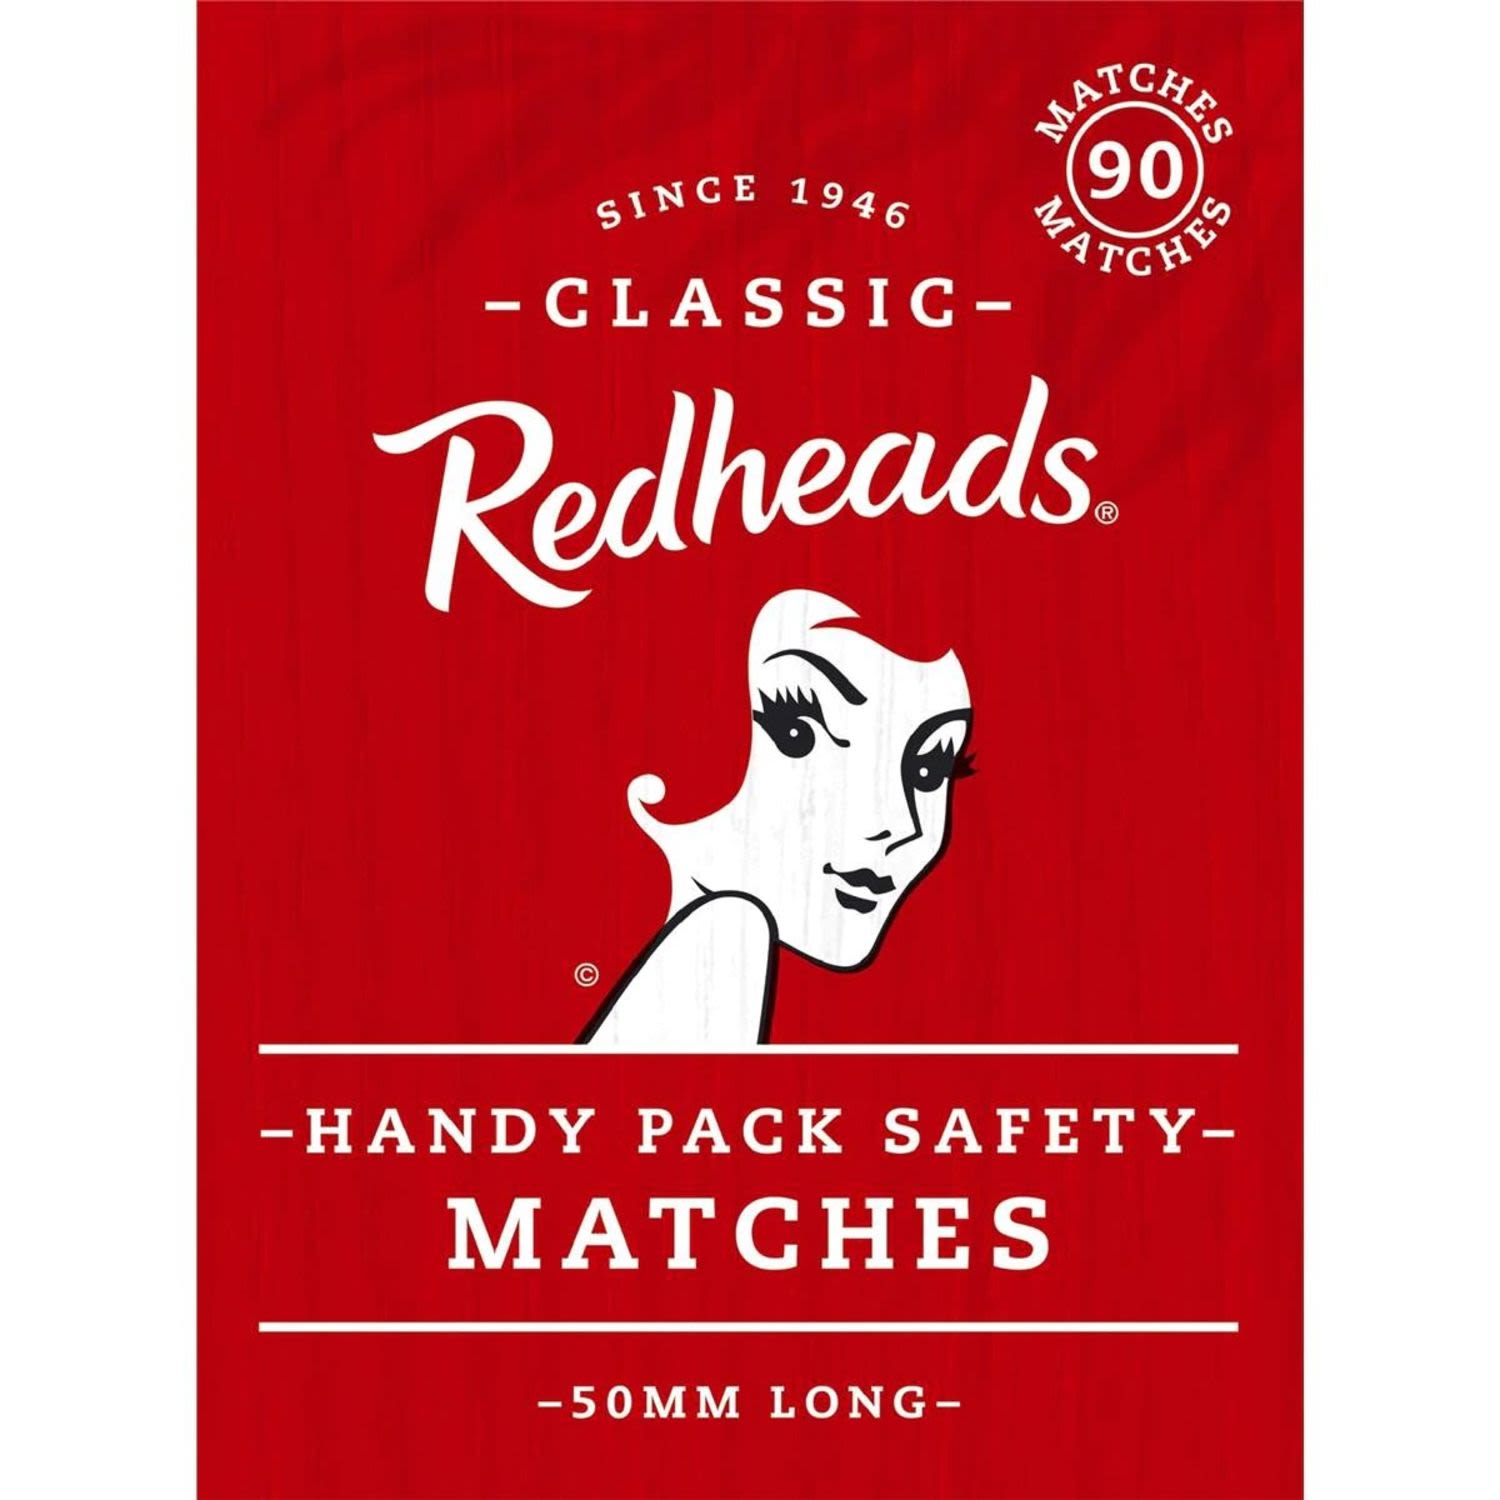 Redheads Matches Handy Pack 90 Matches, 3 Each